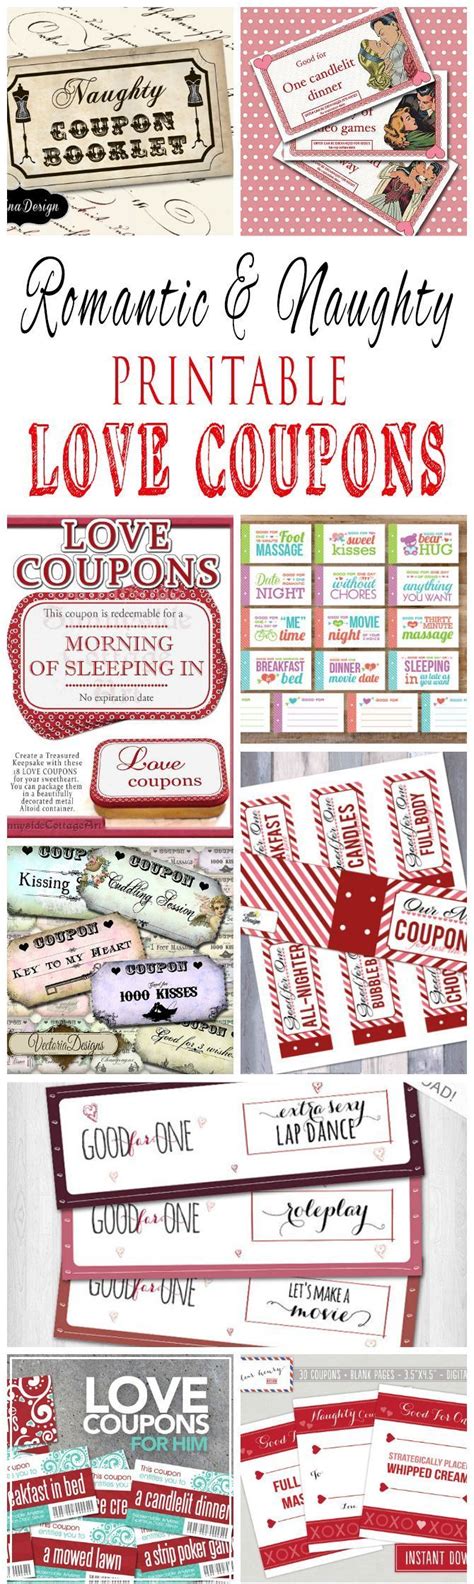 Romantic And Naughty Printable Love Coupons For Him